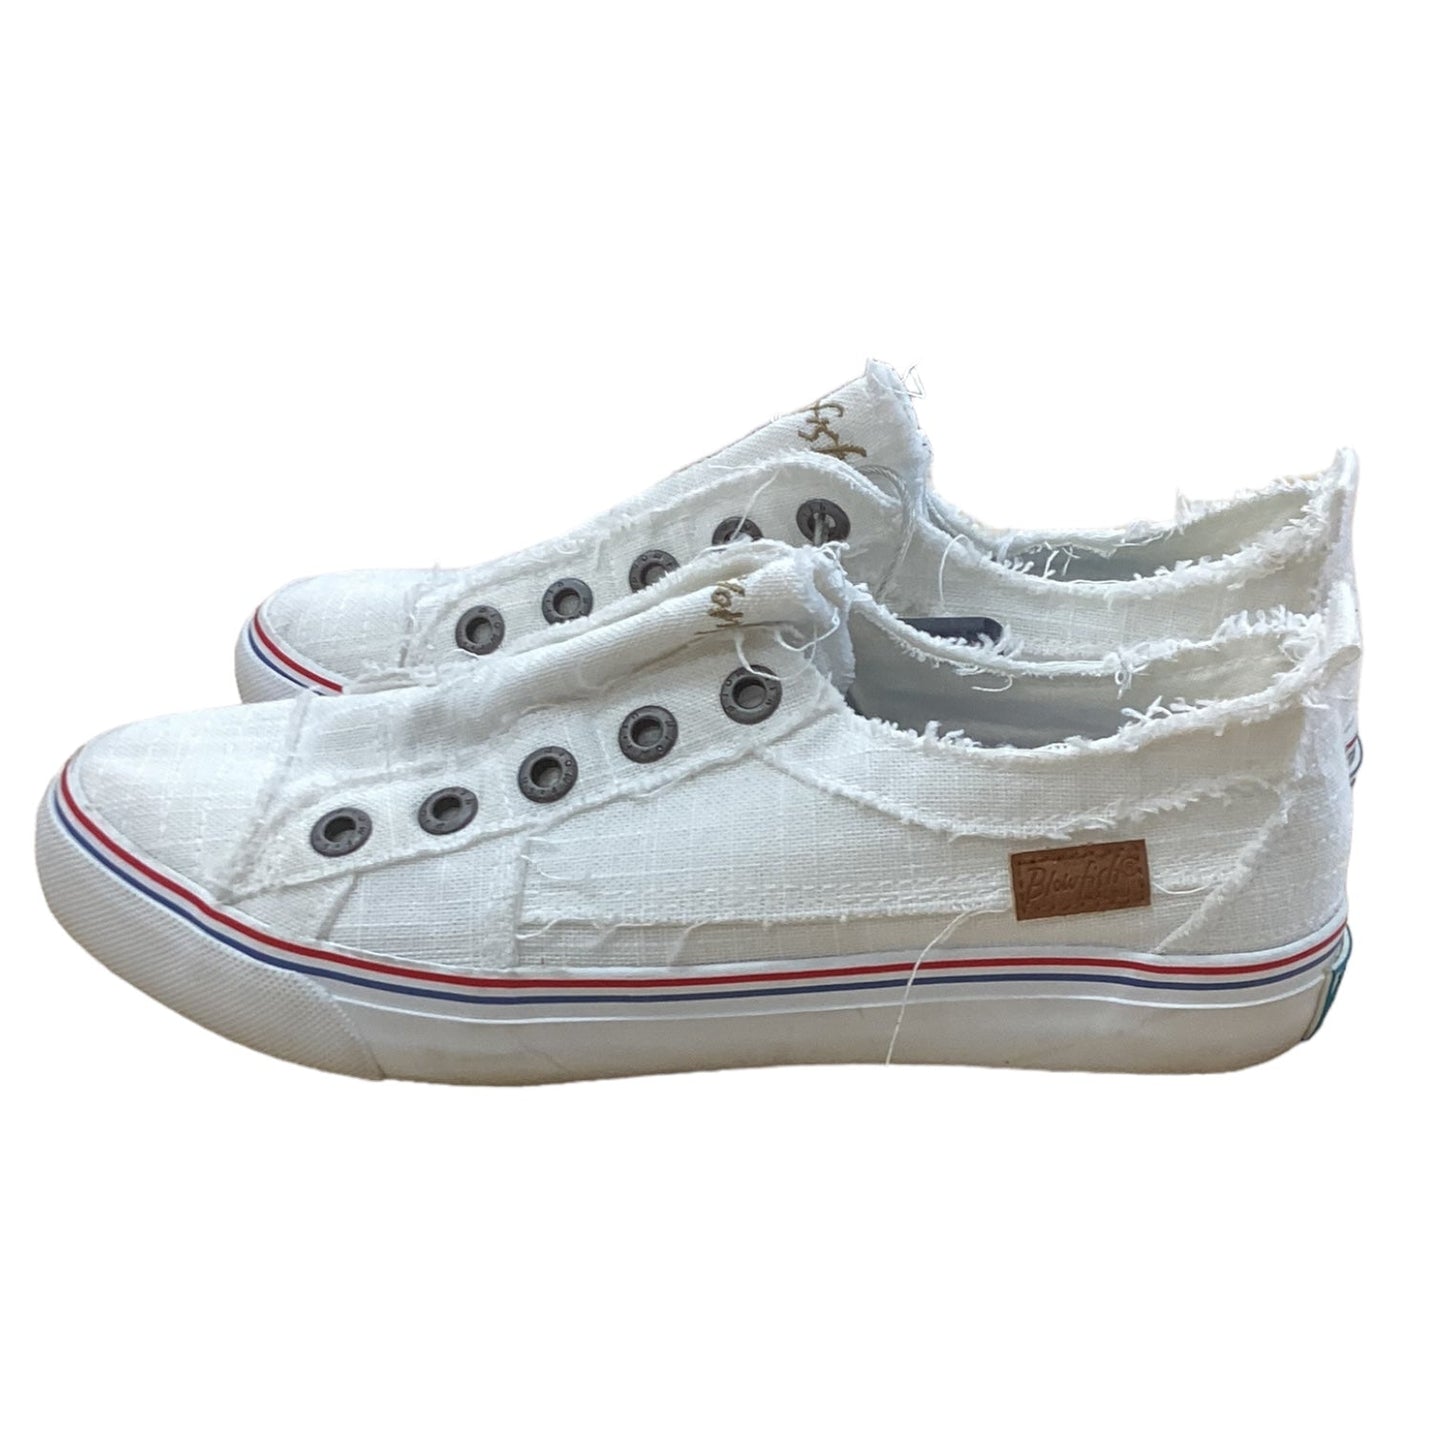 White Shoes Sneakers Blowfish, Size 7.5